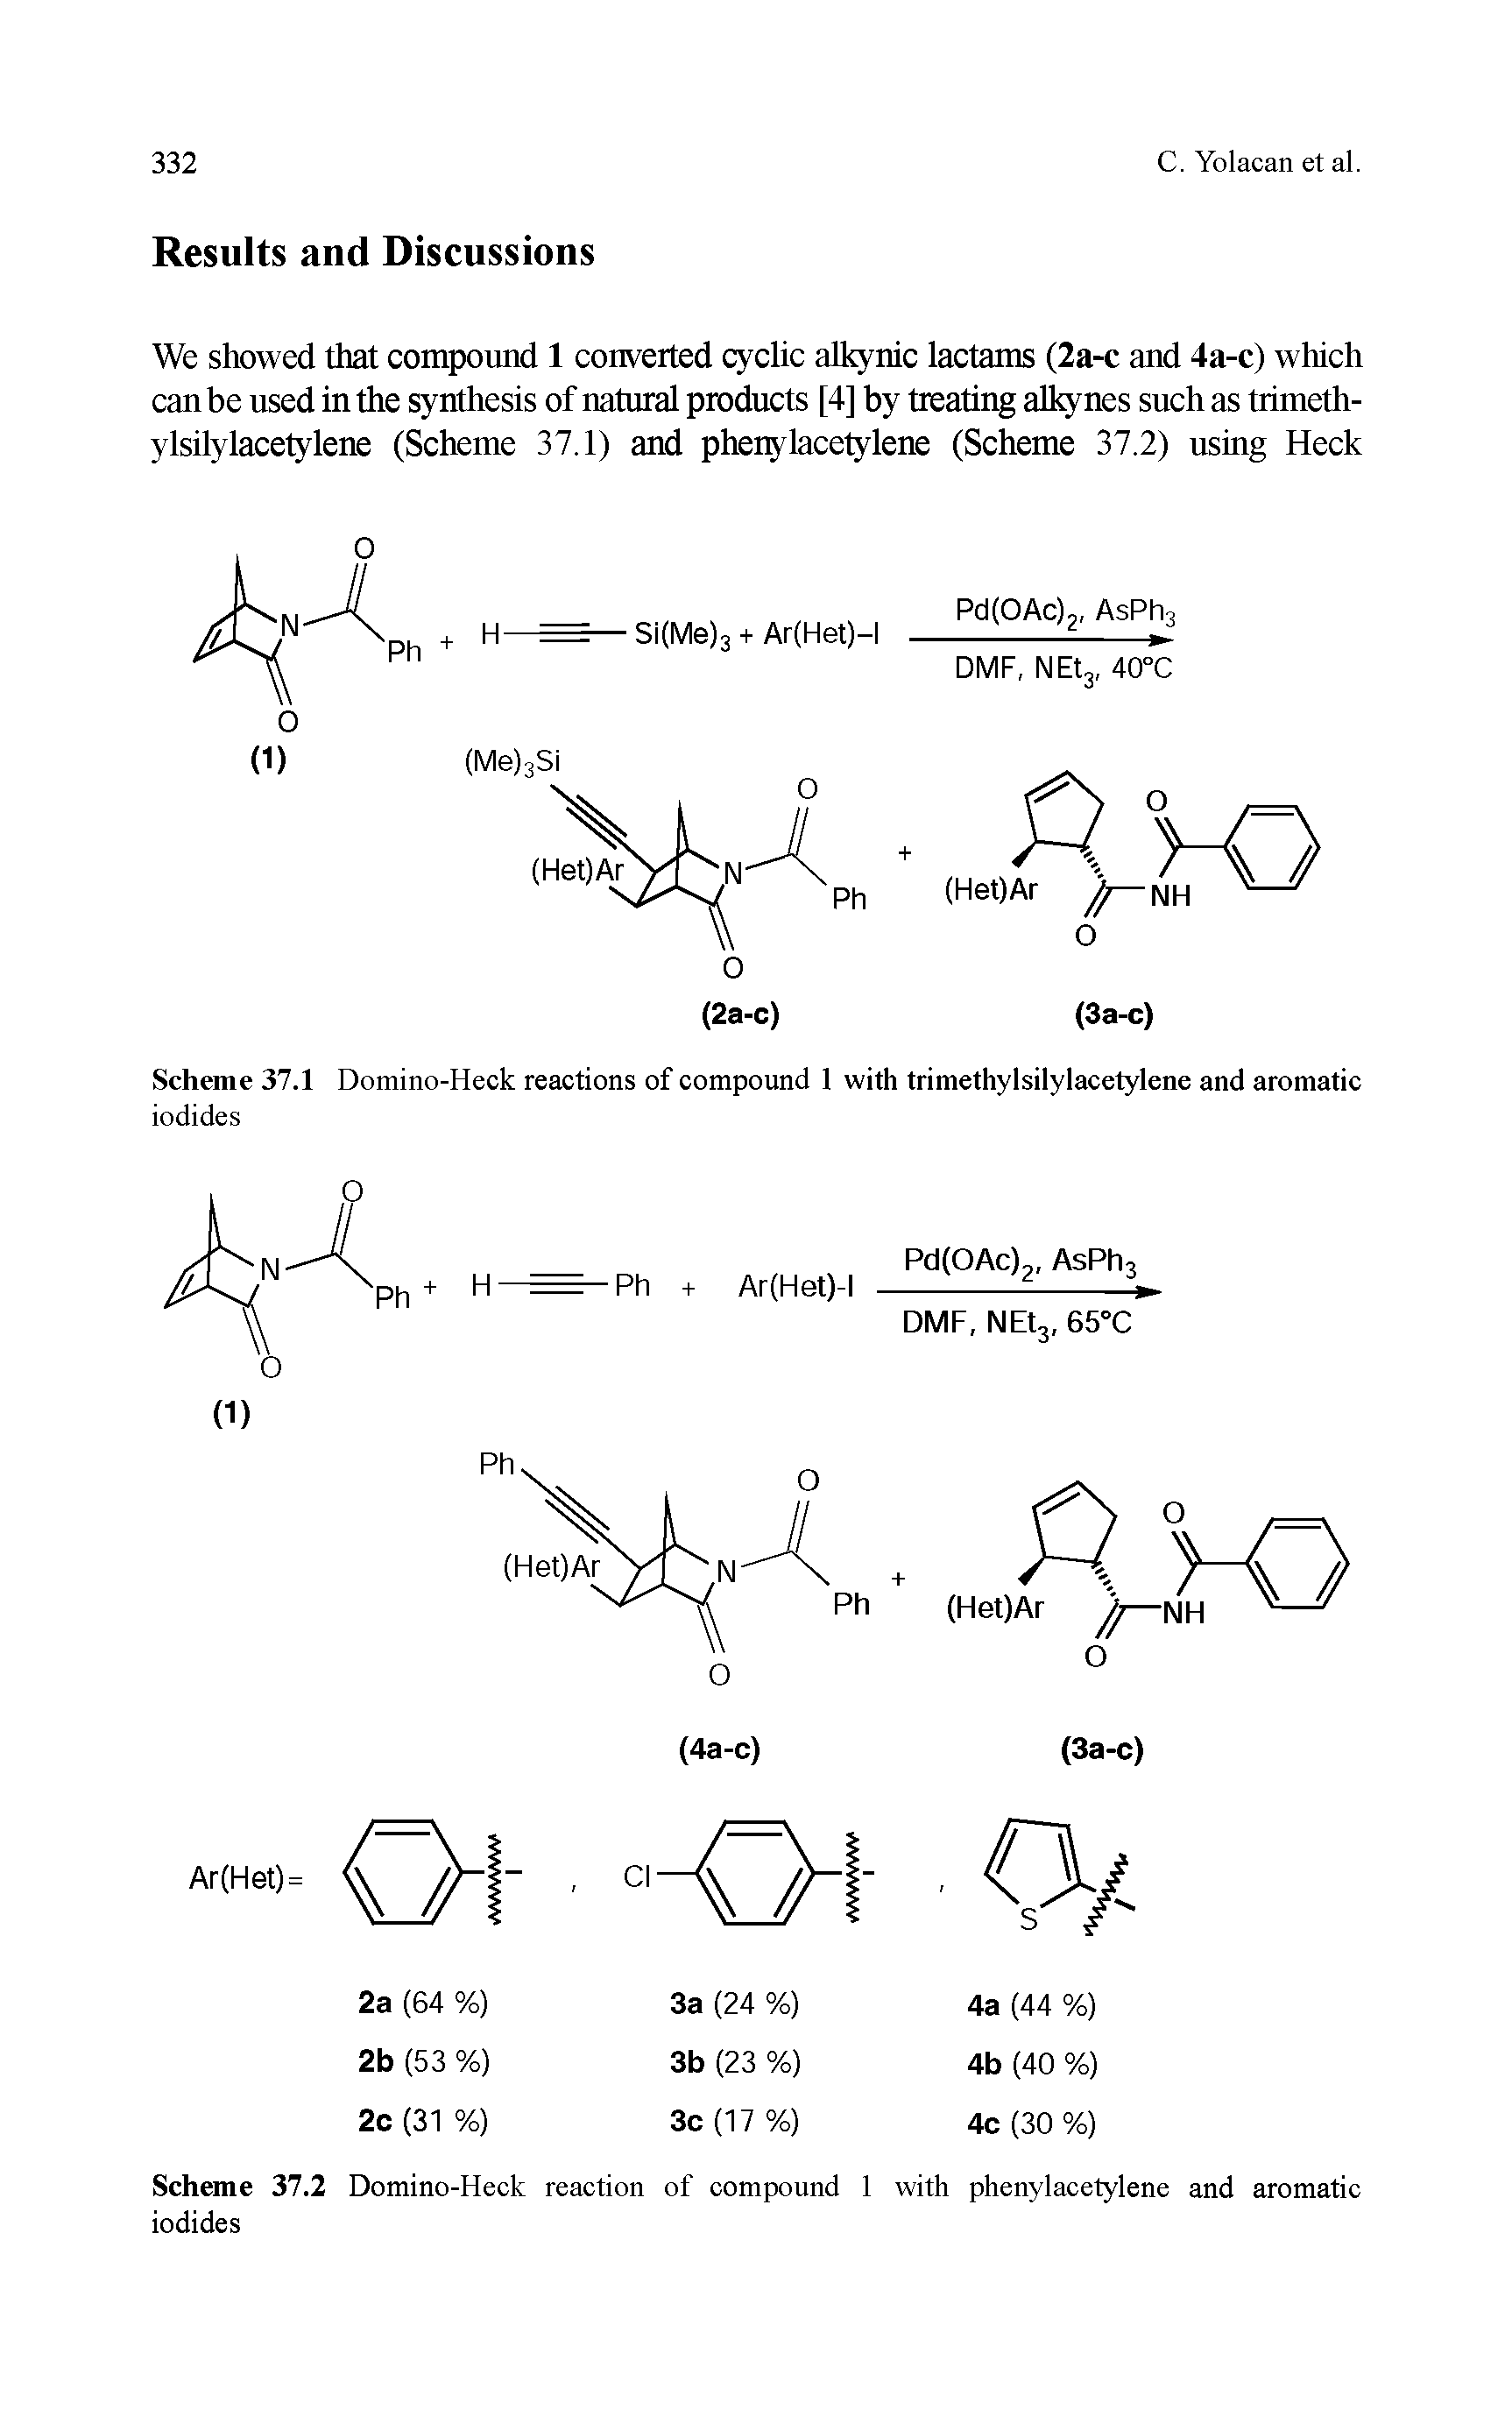 Scheme 37.2 Domino-Heck reaction of compound 1 with phenylacetylene and aromatic iodides...